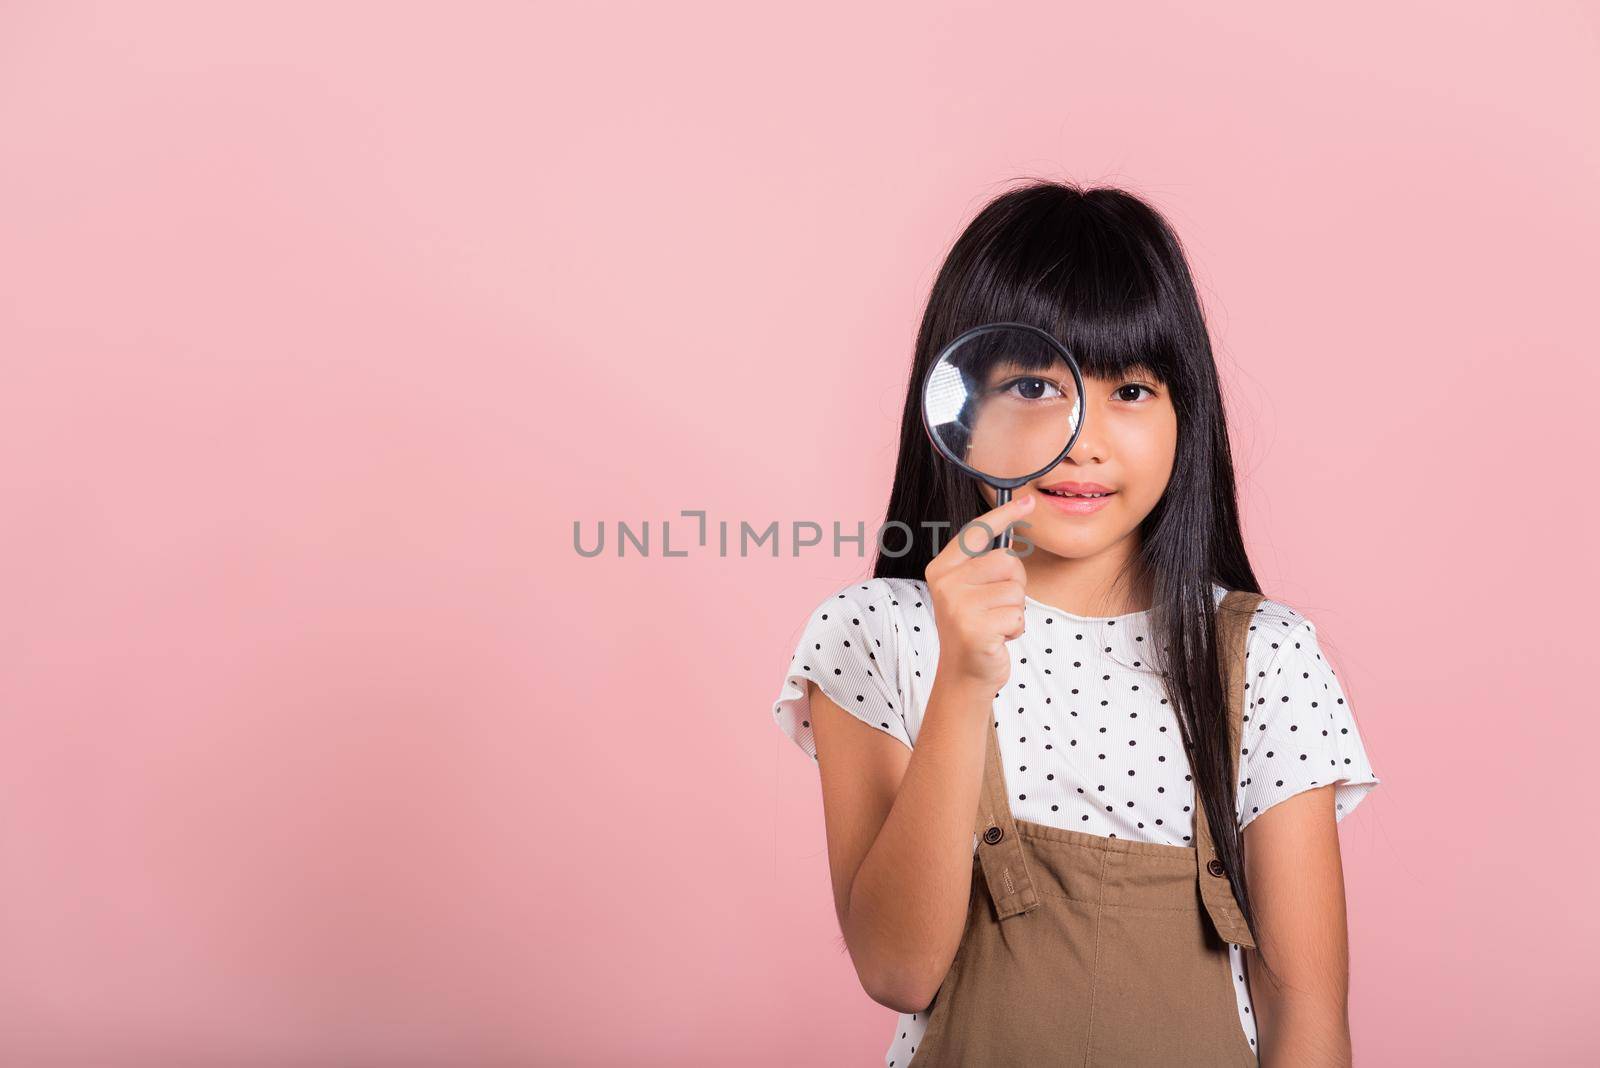 Asian little kid 10 years old funny looking through magnifying glass at studio shot isolated on pink background, Happy child girl lifestyle smiling exploring holding magnifier searching